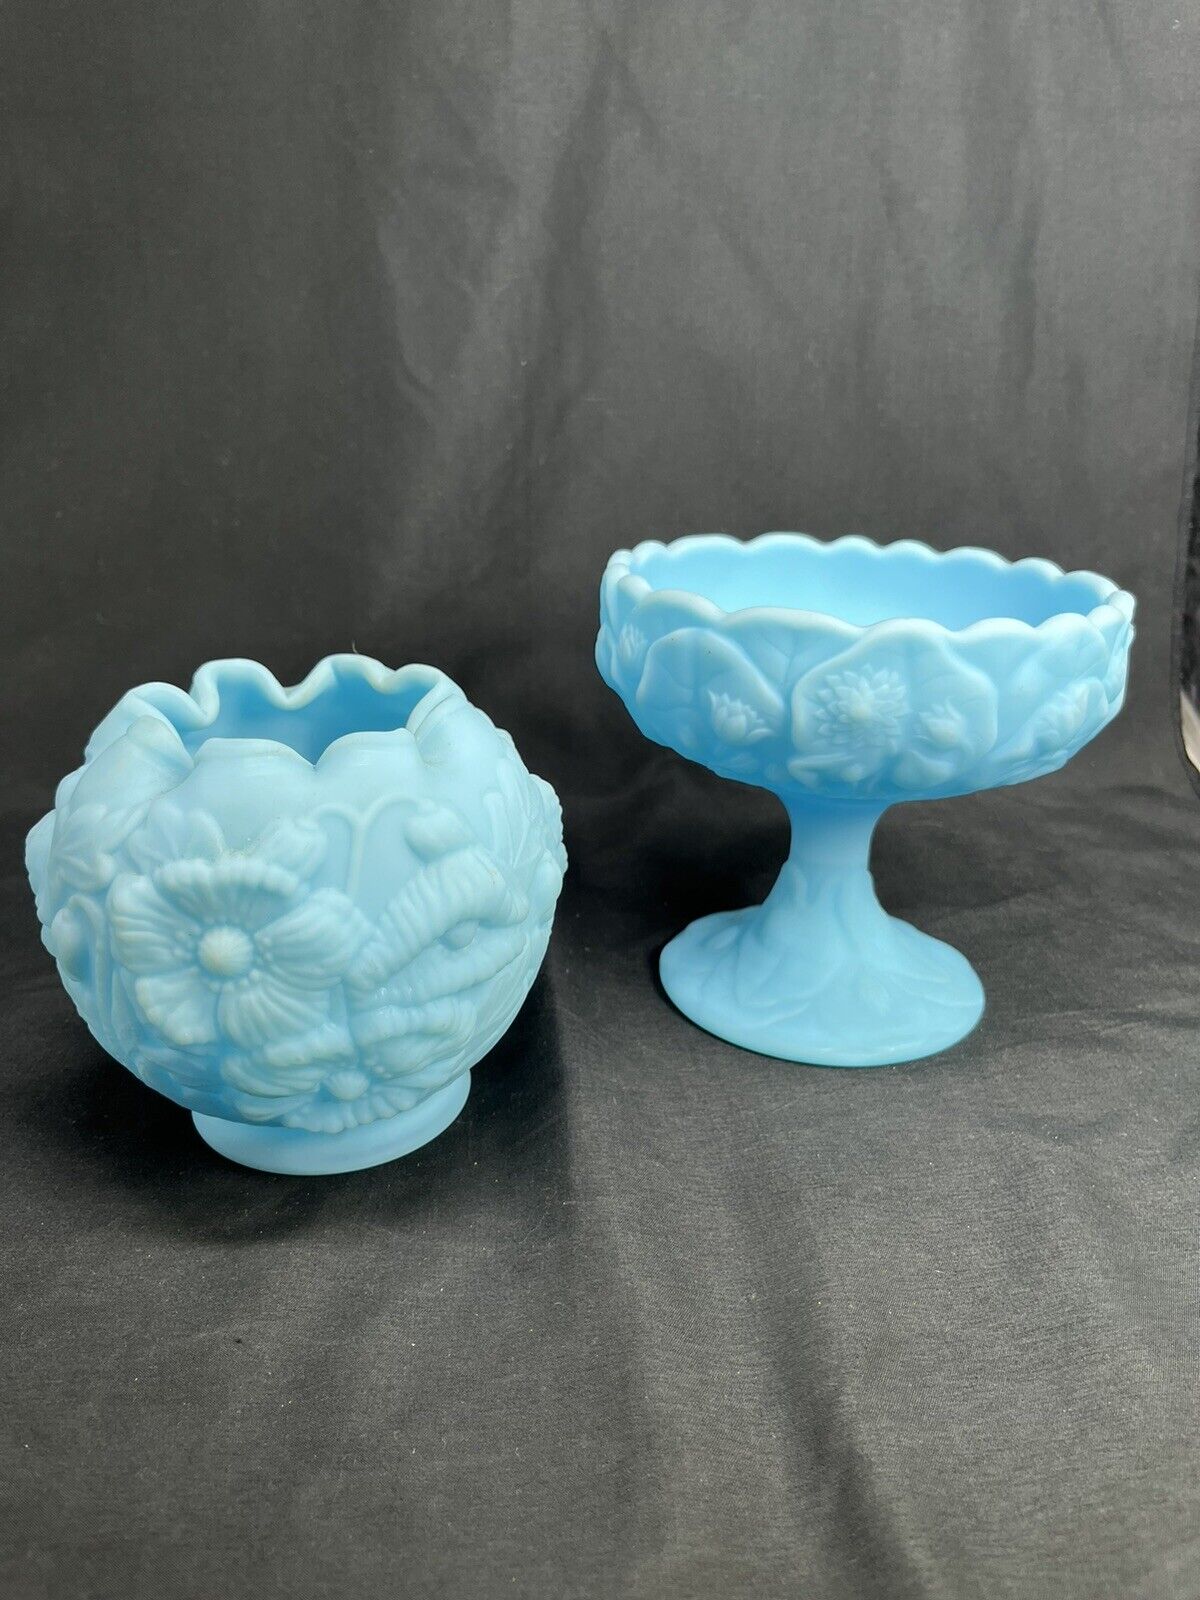 2 Fenton Blue Satin Glass Footed Pedestal & Bowl Compote Candy Dish ~ Water Lily